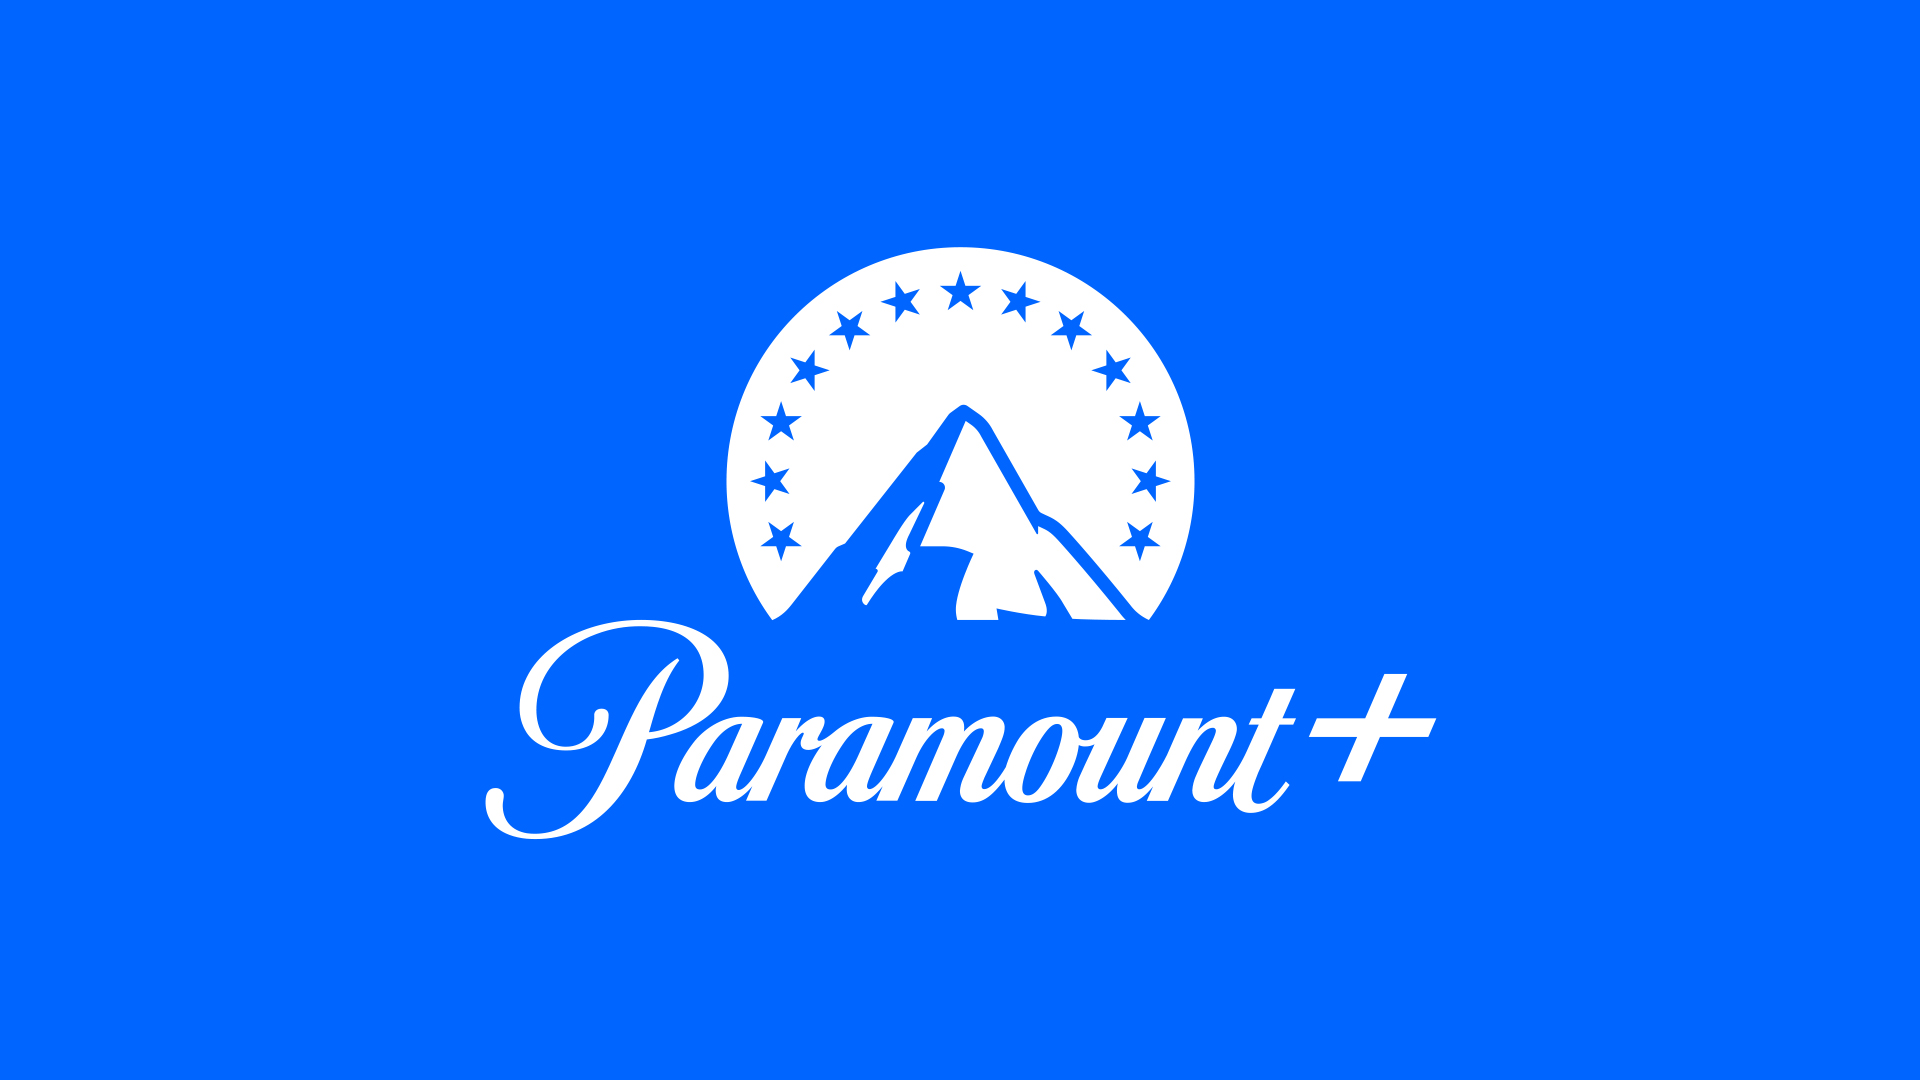 Potential Paramount Takeover Could Affect Star Trek, Paramount+